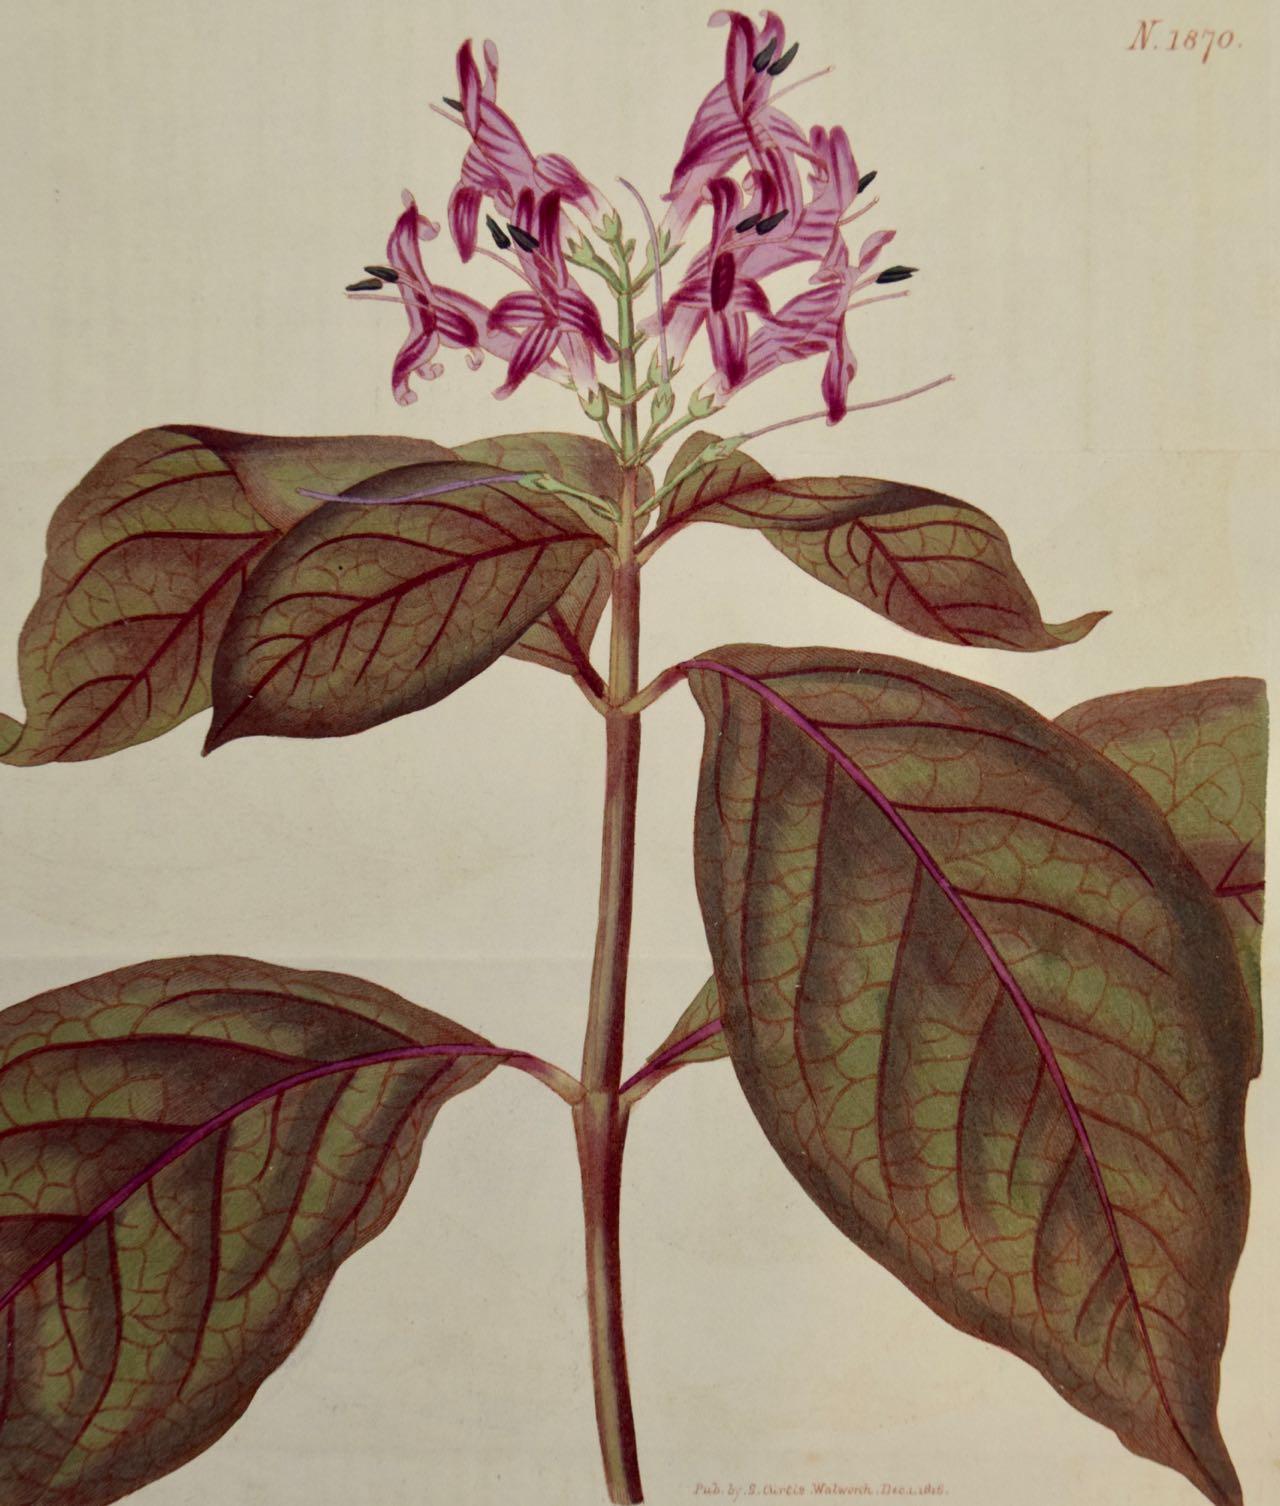  Flowering Justica Plant: A 19th C. Hand-colored Botanical Engraving by Curtis - Print by William Curtis